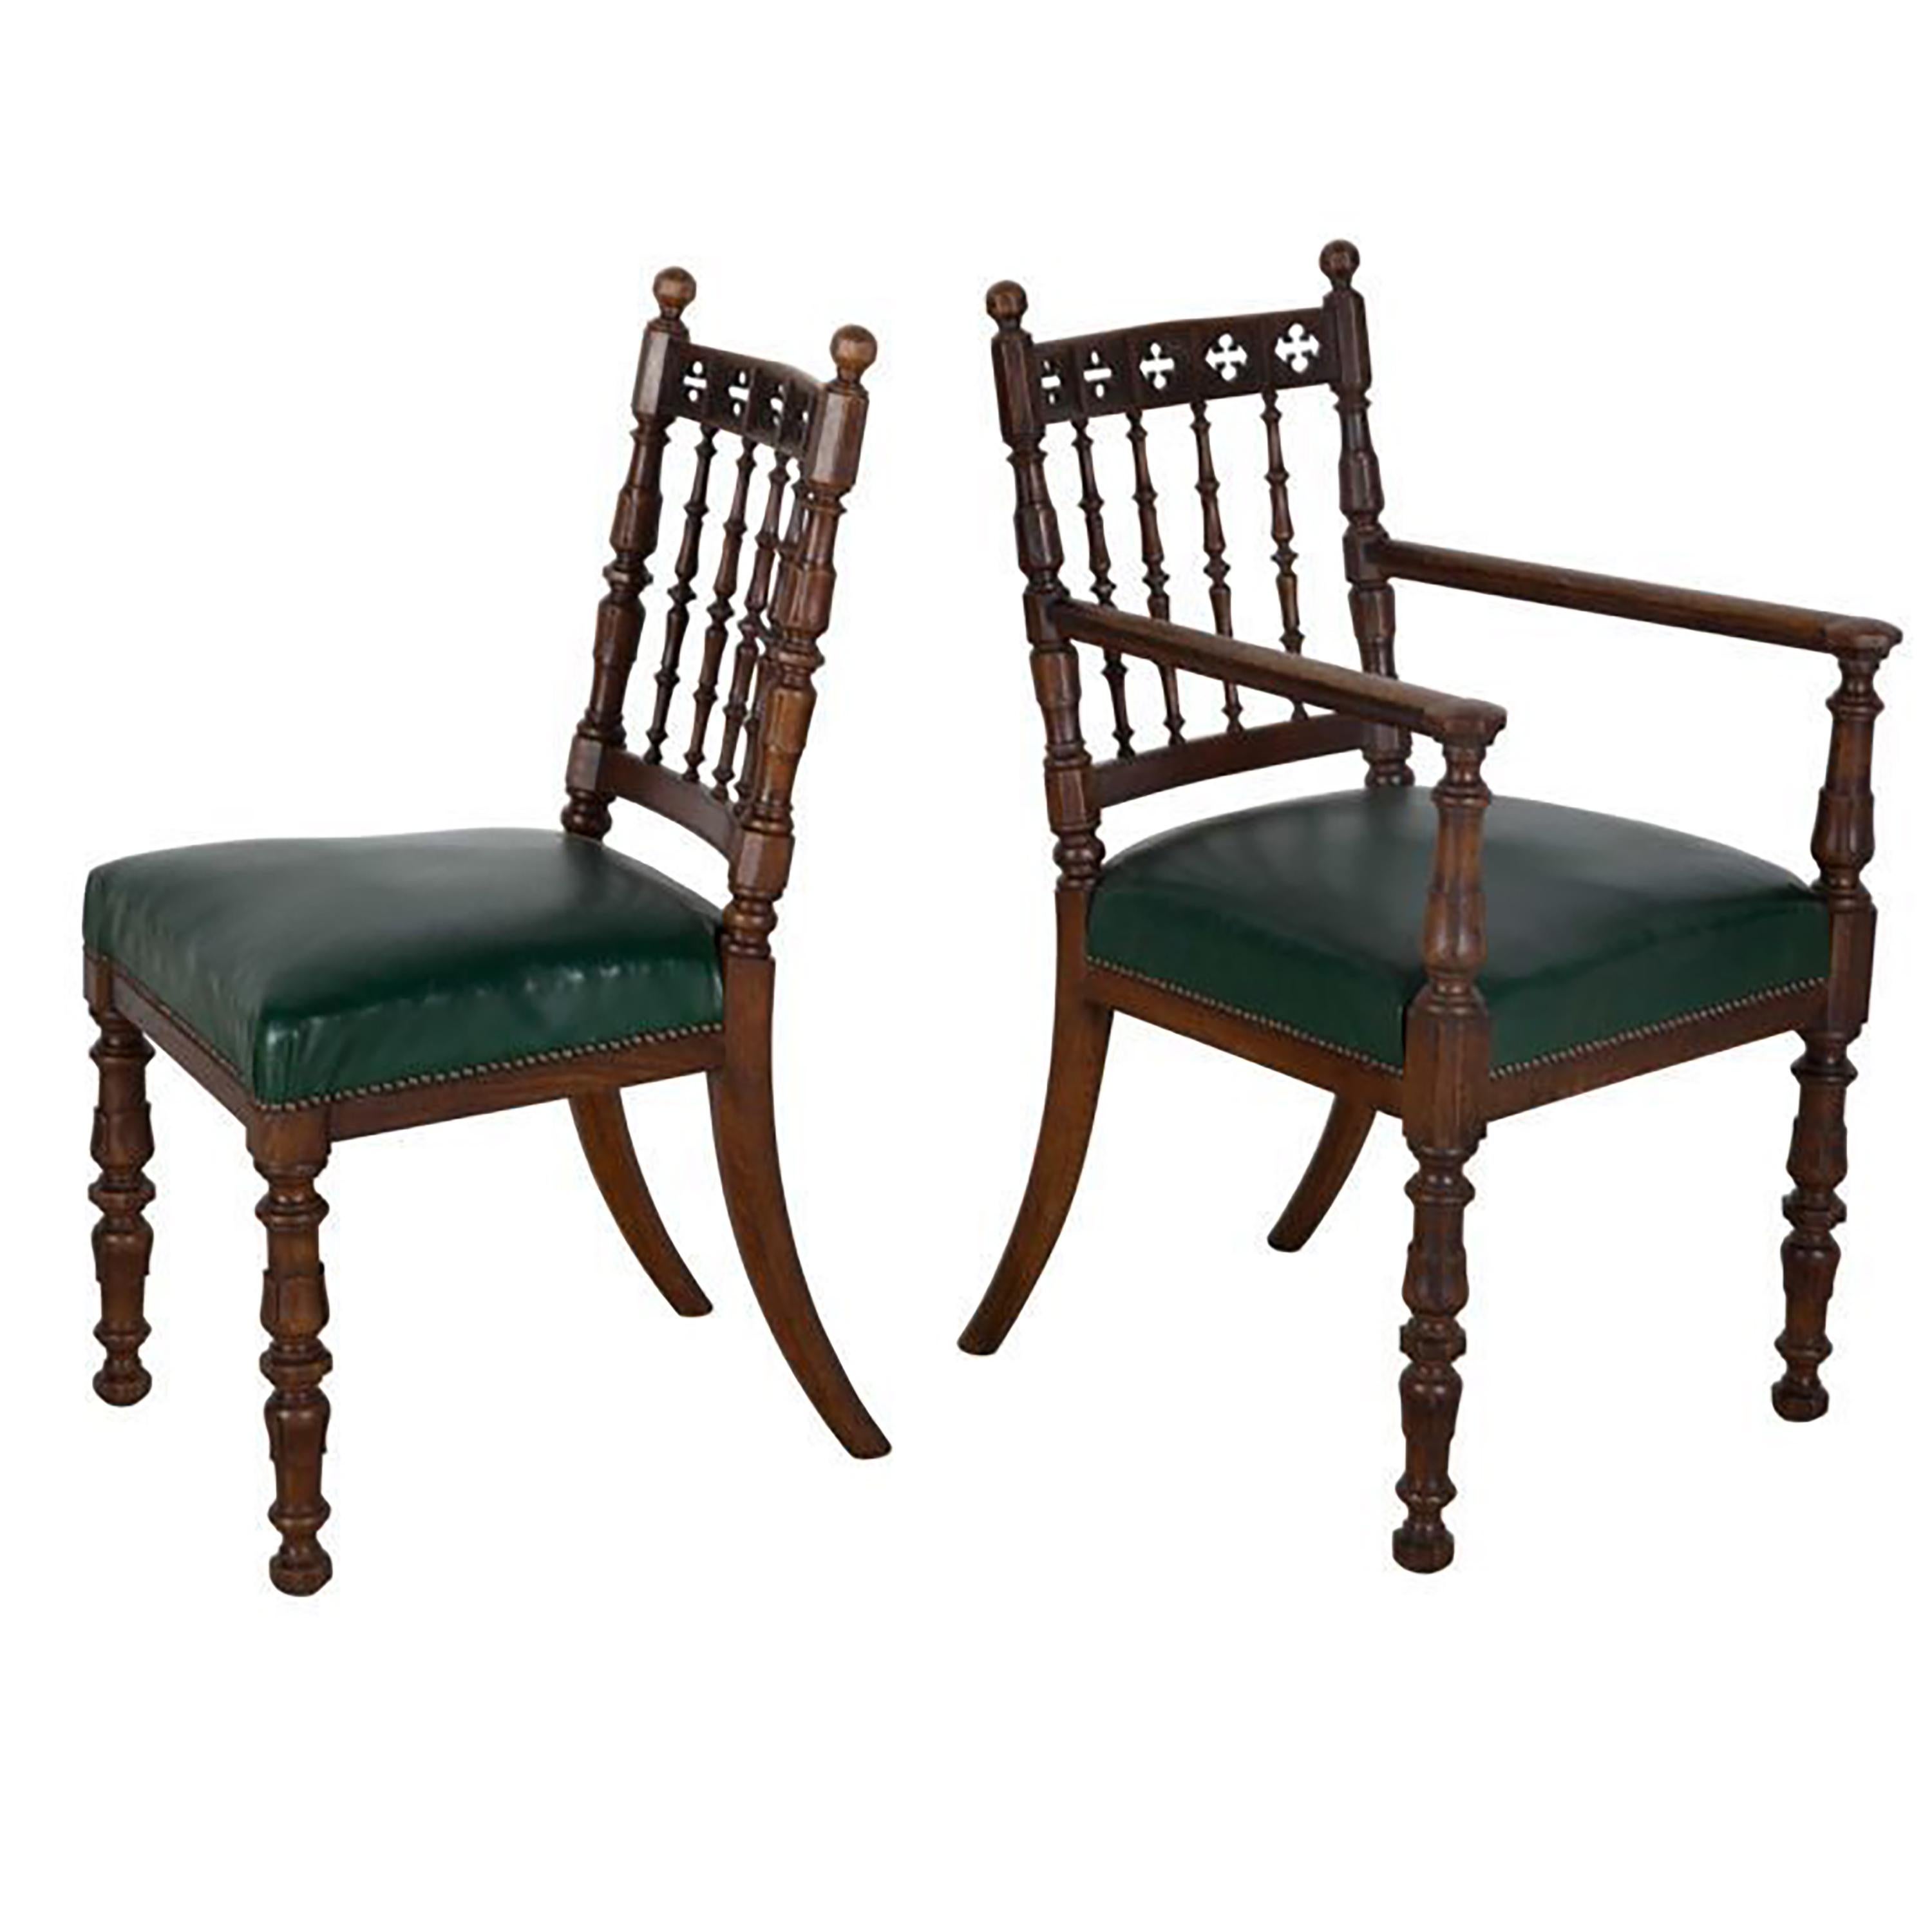 A set of eight 19th century oak dining chairs, with leather stuff over seats and carved quatrefoil top rails, these chairs and exceptional quality, the rake to the rear legs are wonderful. One carver chair made to match.